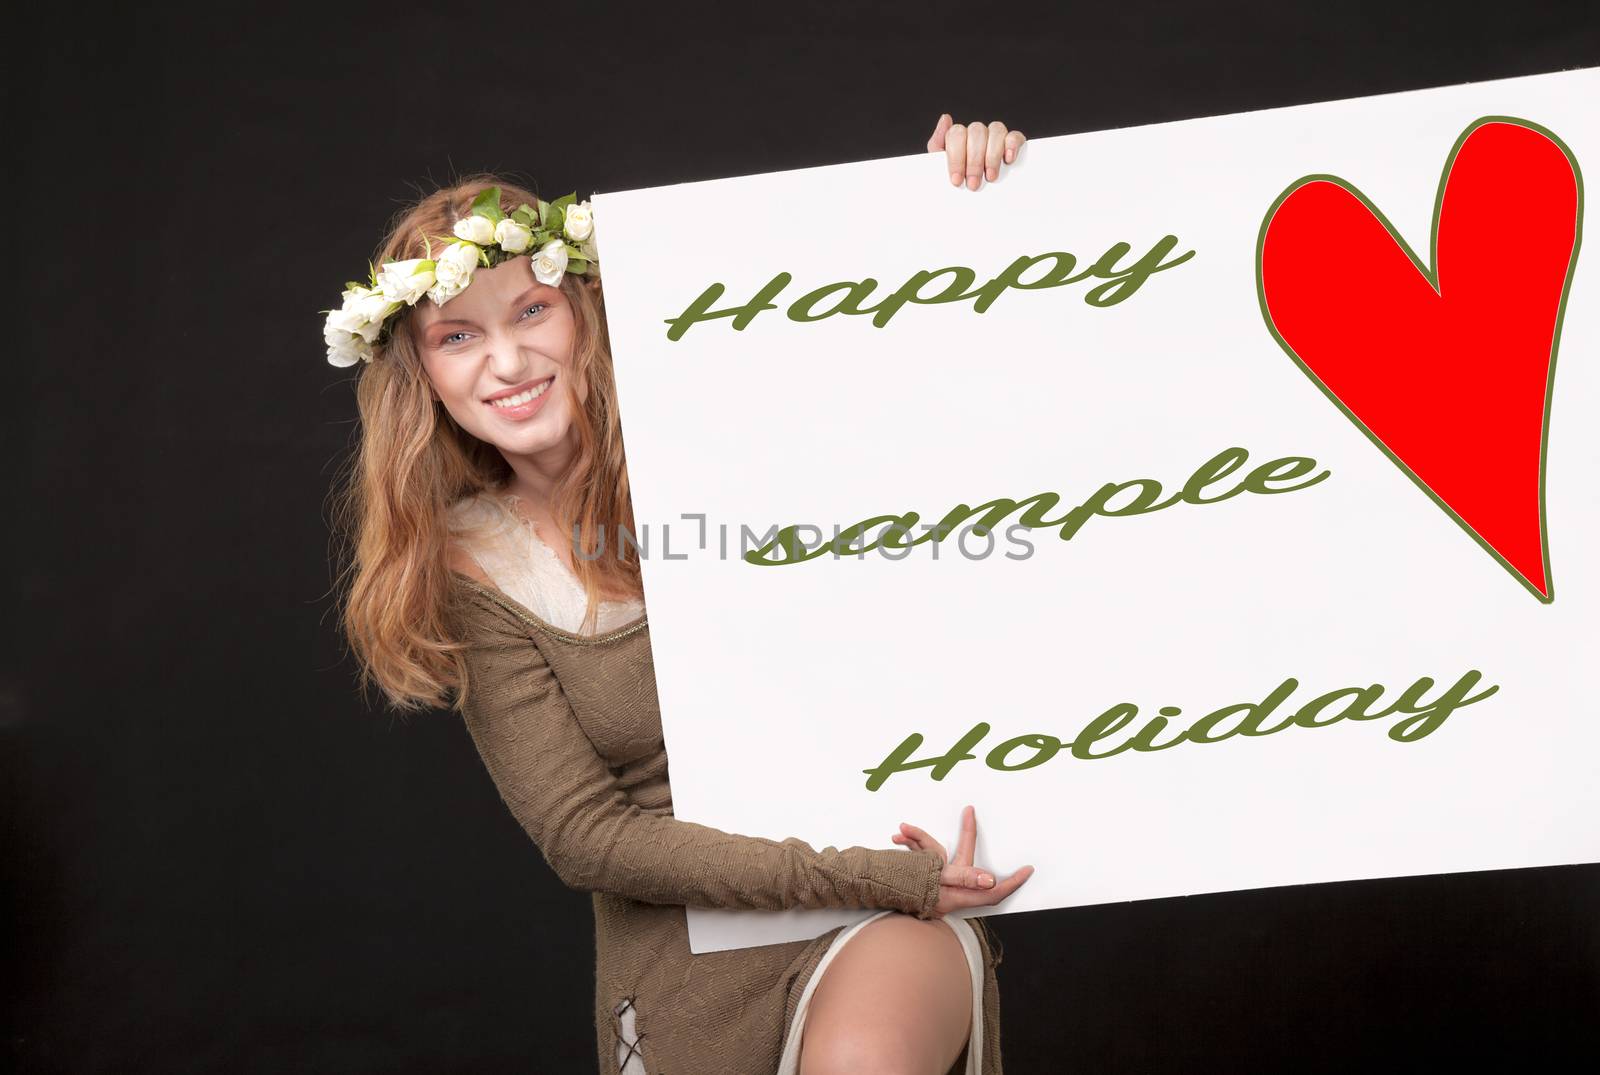 A playful beautiful woman with white roses wreath in her long hair is holding and showing a sign with red heart, sample text and a clipping path.